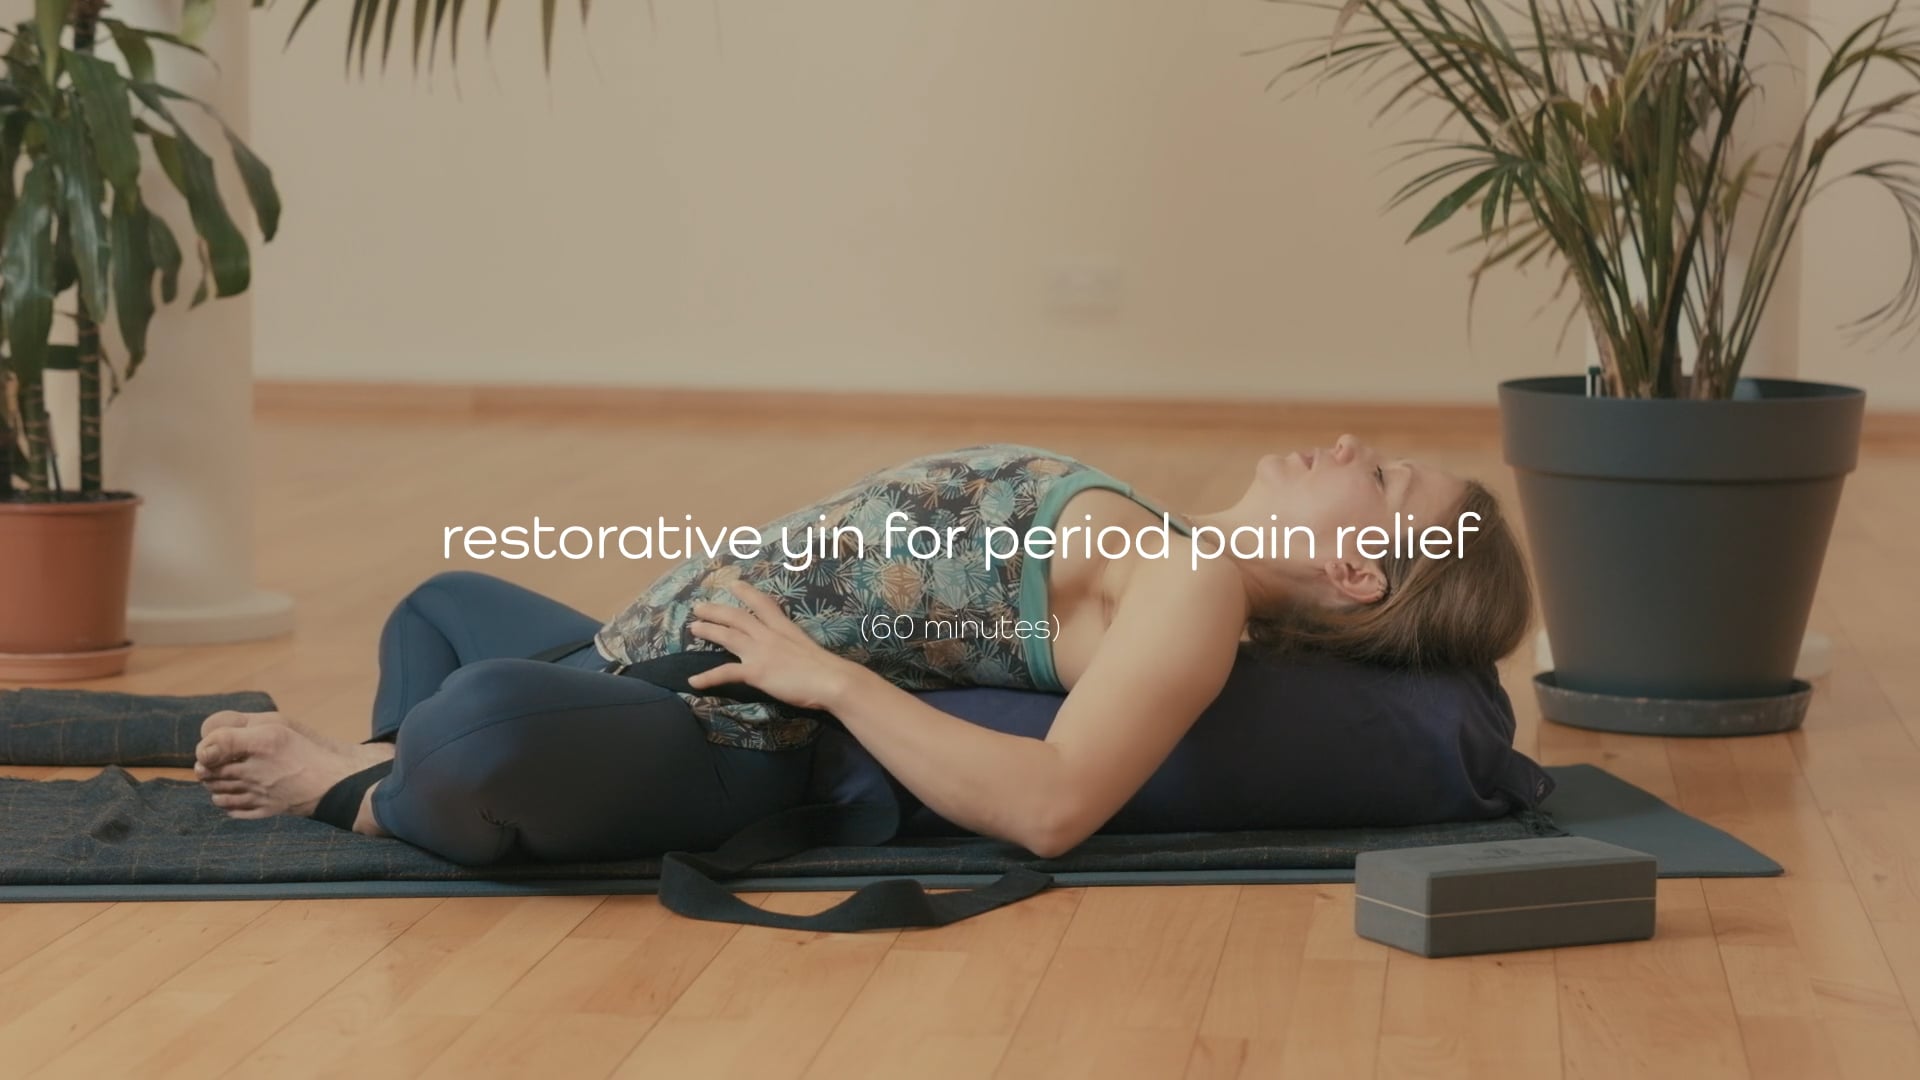 Restorative Yin for Period Pain Relief – 60 mins